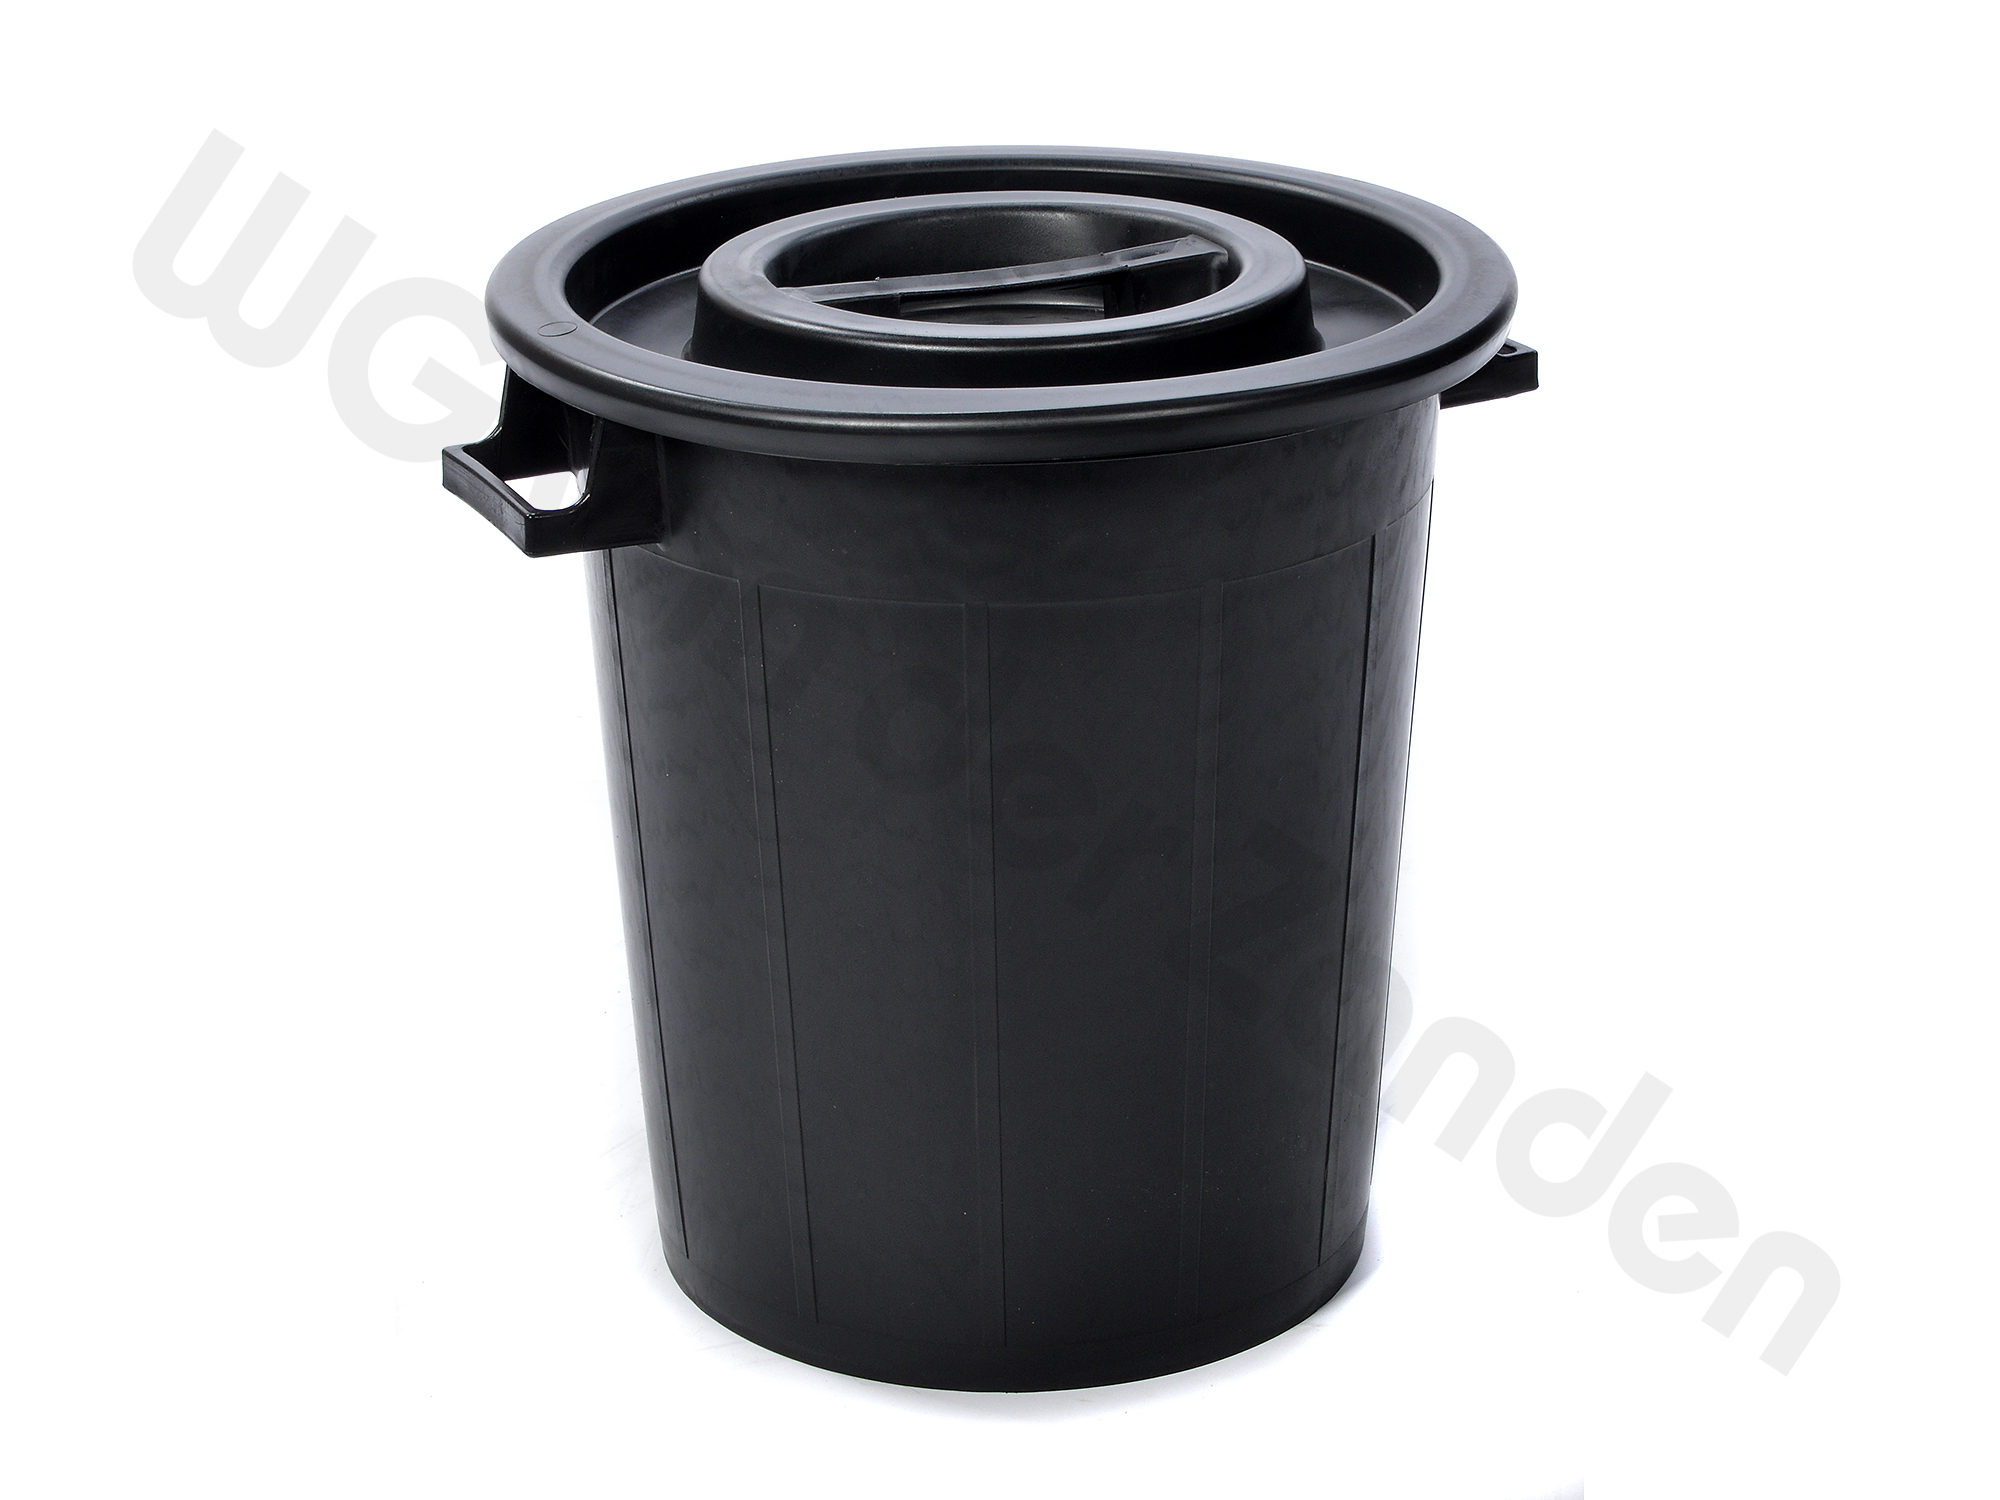 440032 GARBAGE BIN PLASTIC 50 LTR ROUND WITH COVER BLACK